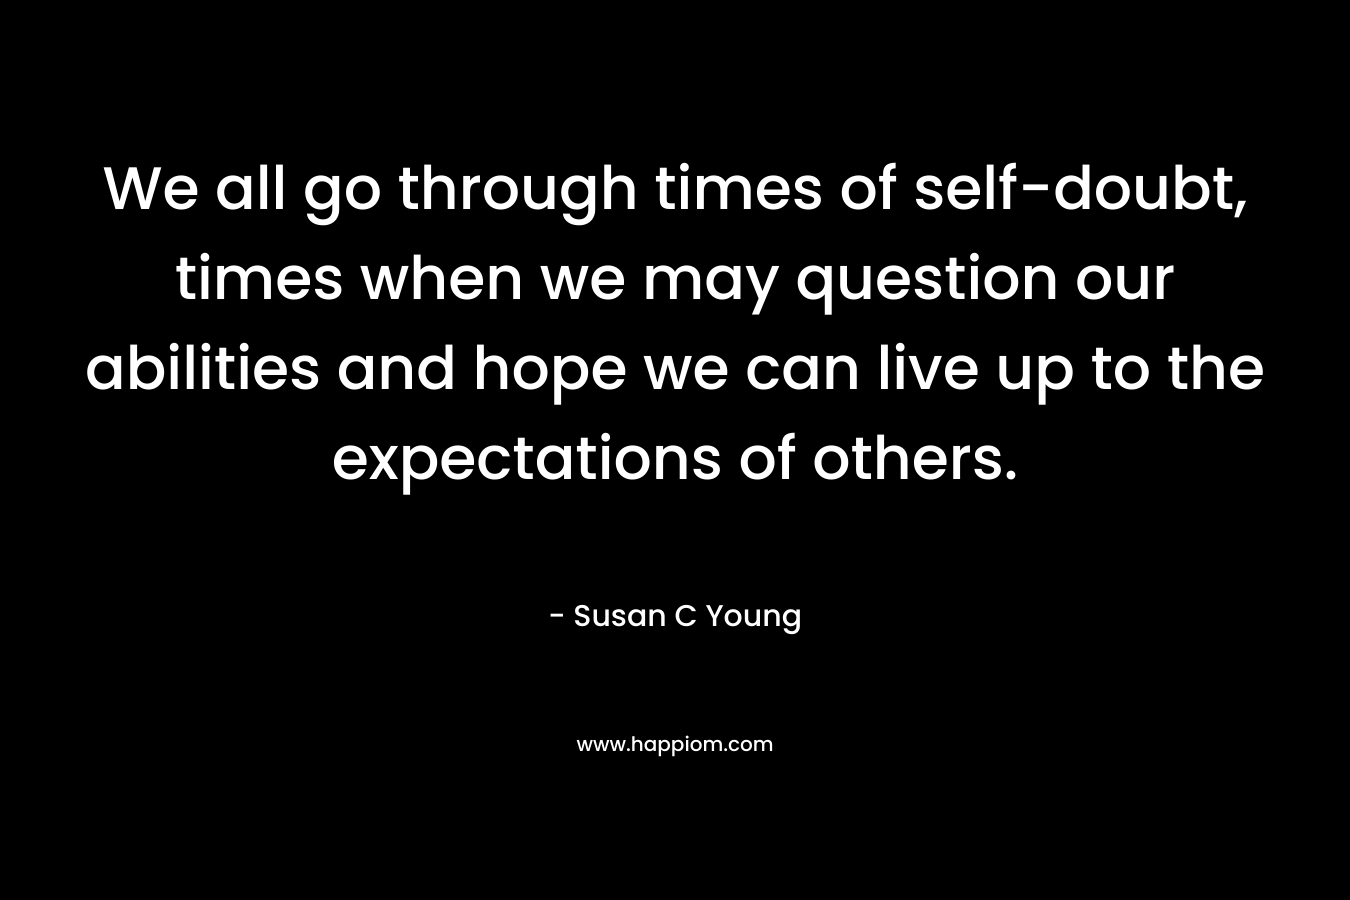 We all go through times of self-doubt, times when we may question our abilities and hope we can live up to the expectations of others.